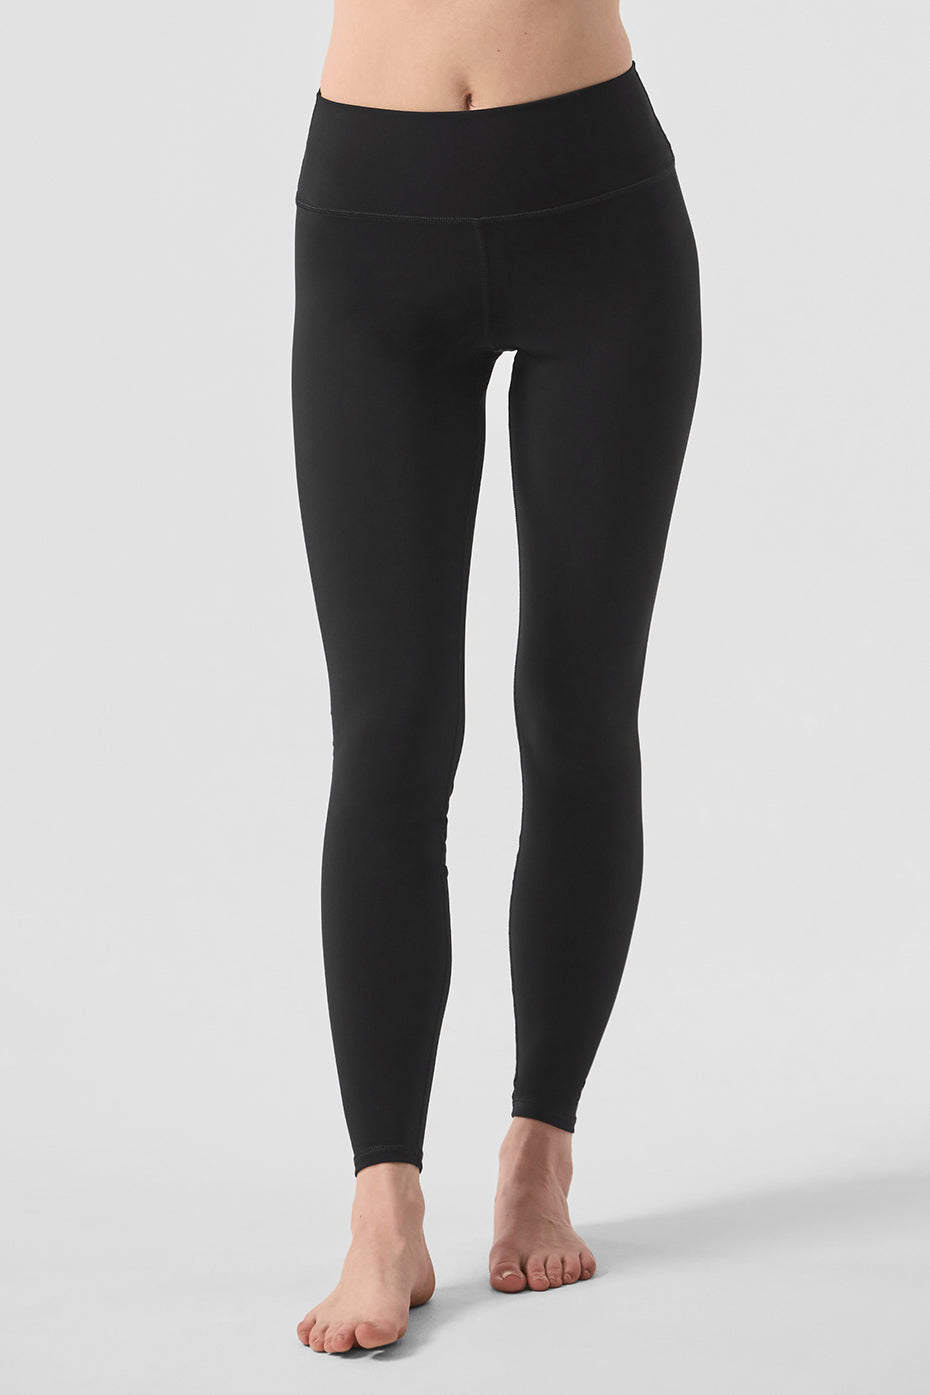 High Waisted Solid Black Leggings Yoga Pants for Women With